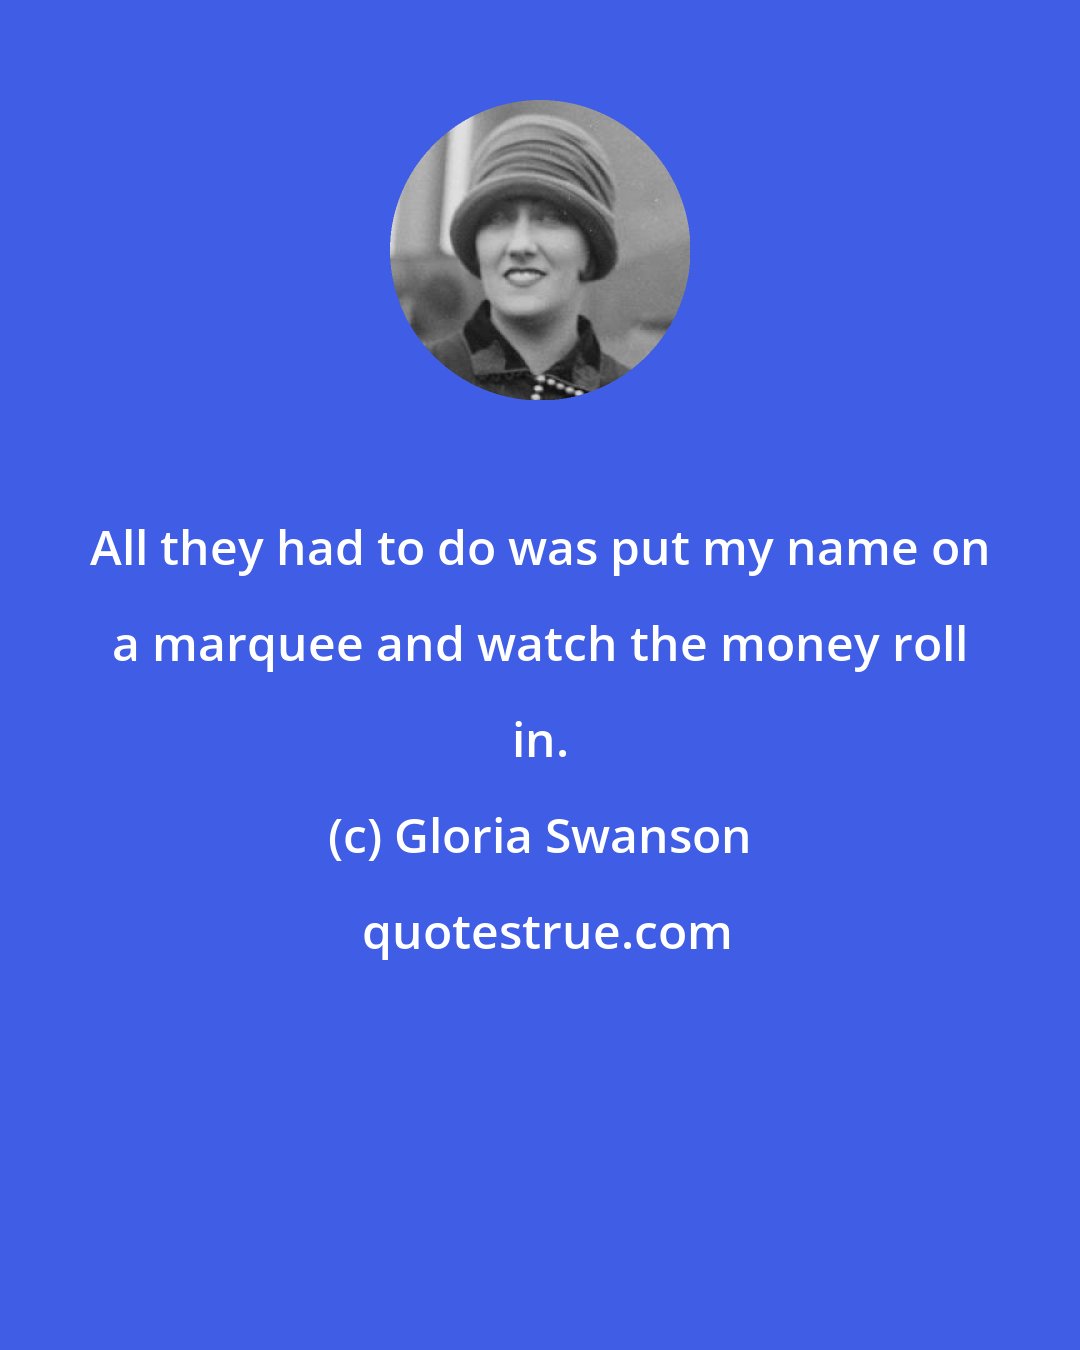 Gloria Swanson: All they had to do was put my name on a marquee and watch the money roll in.